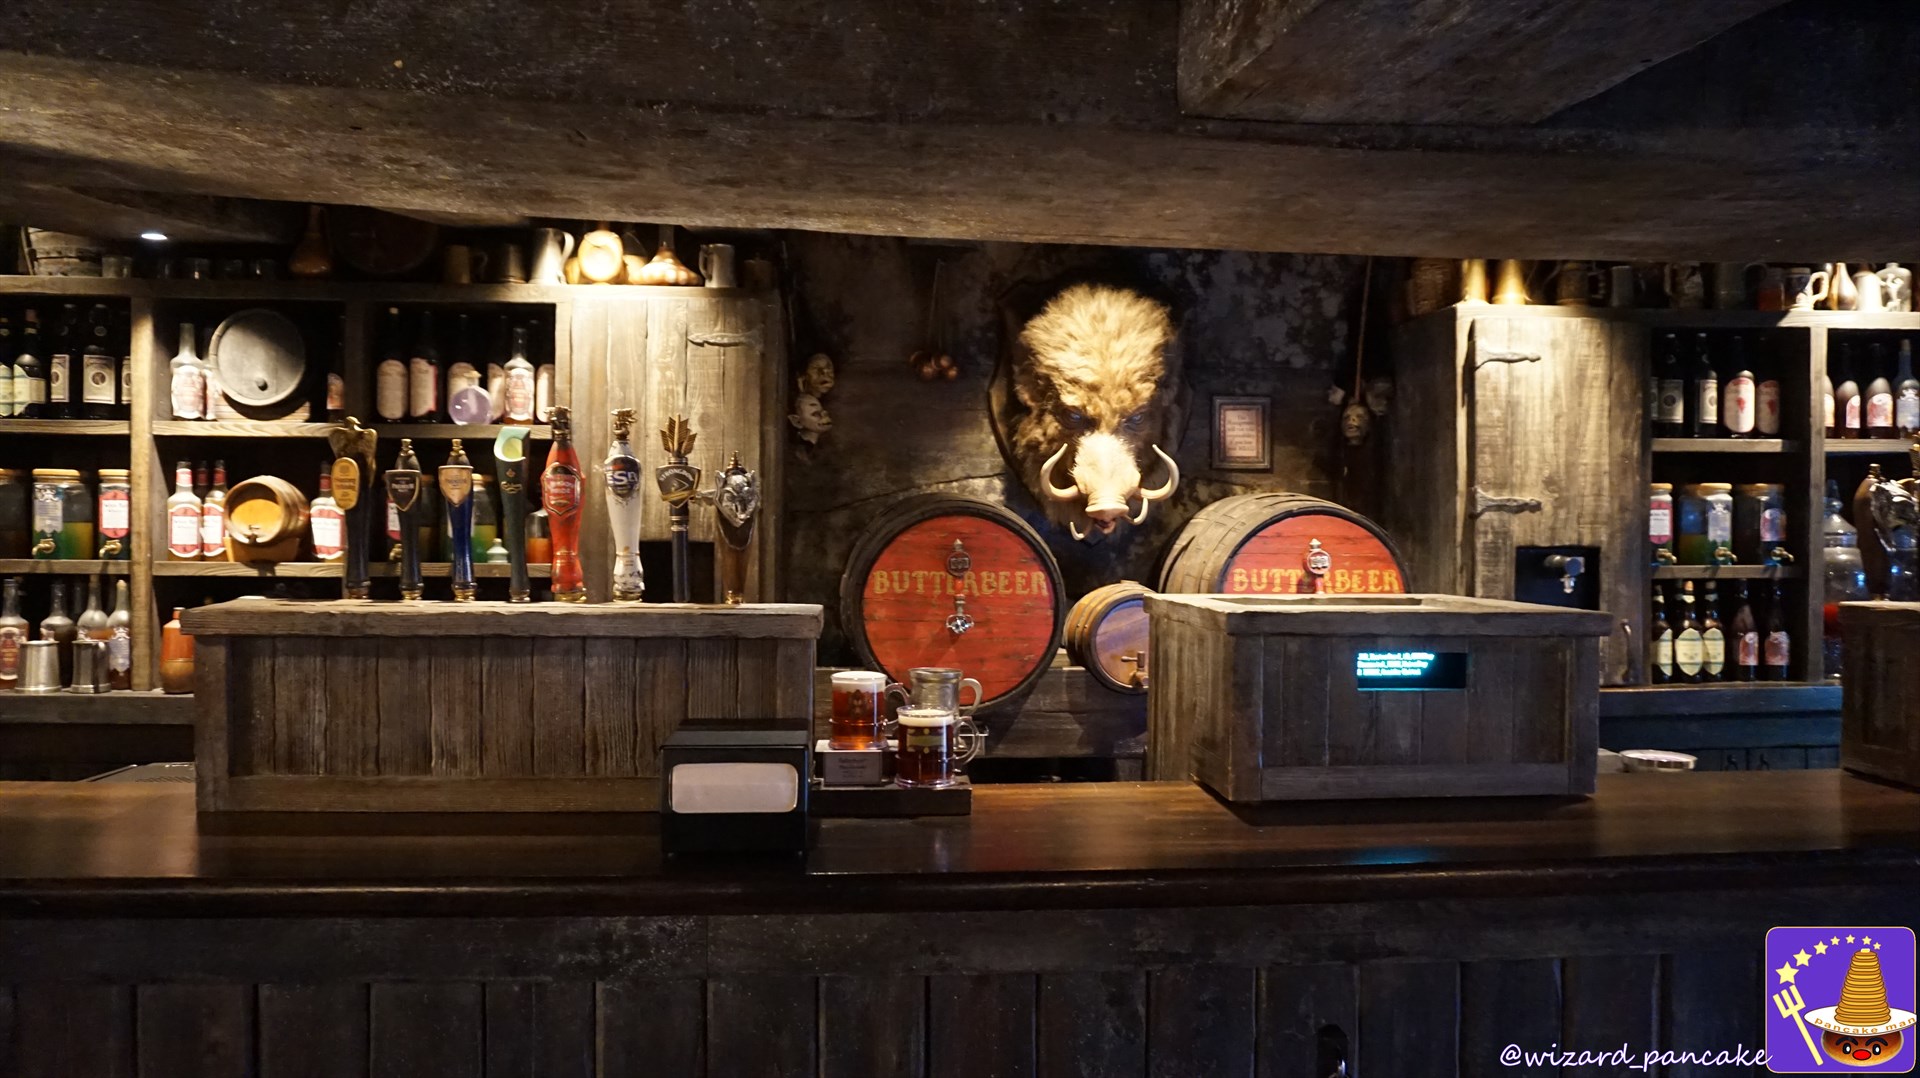 Hog's Head pub in the Harry Potter area Bar counter and boar's head sculpture.